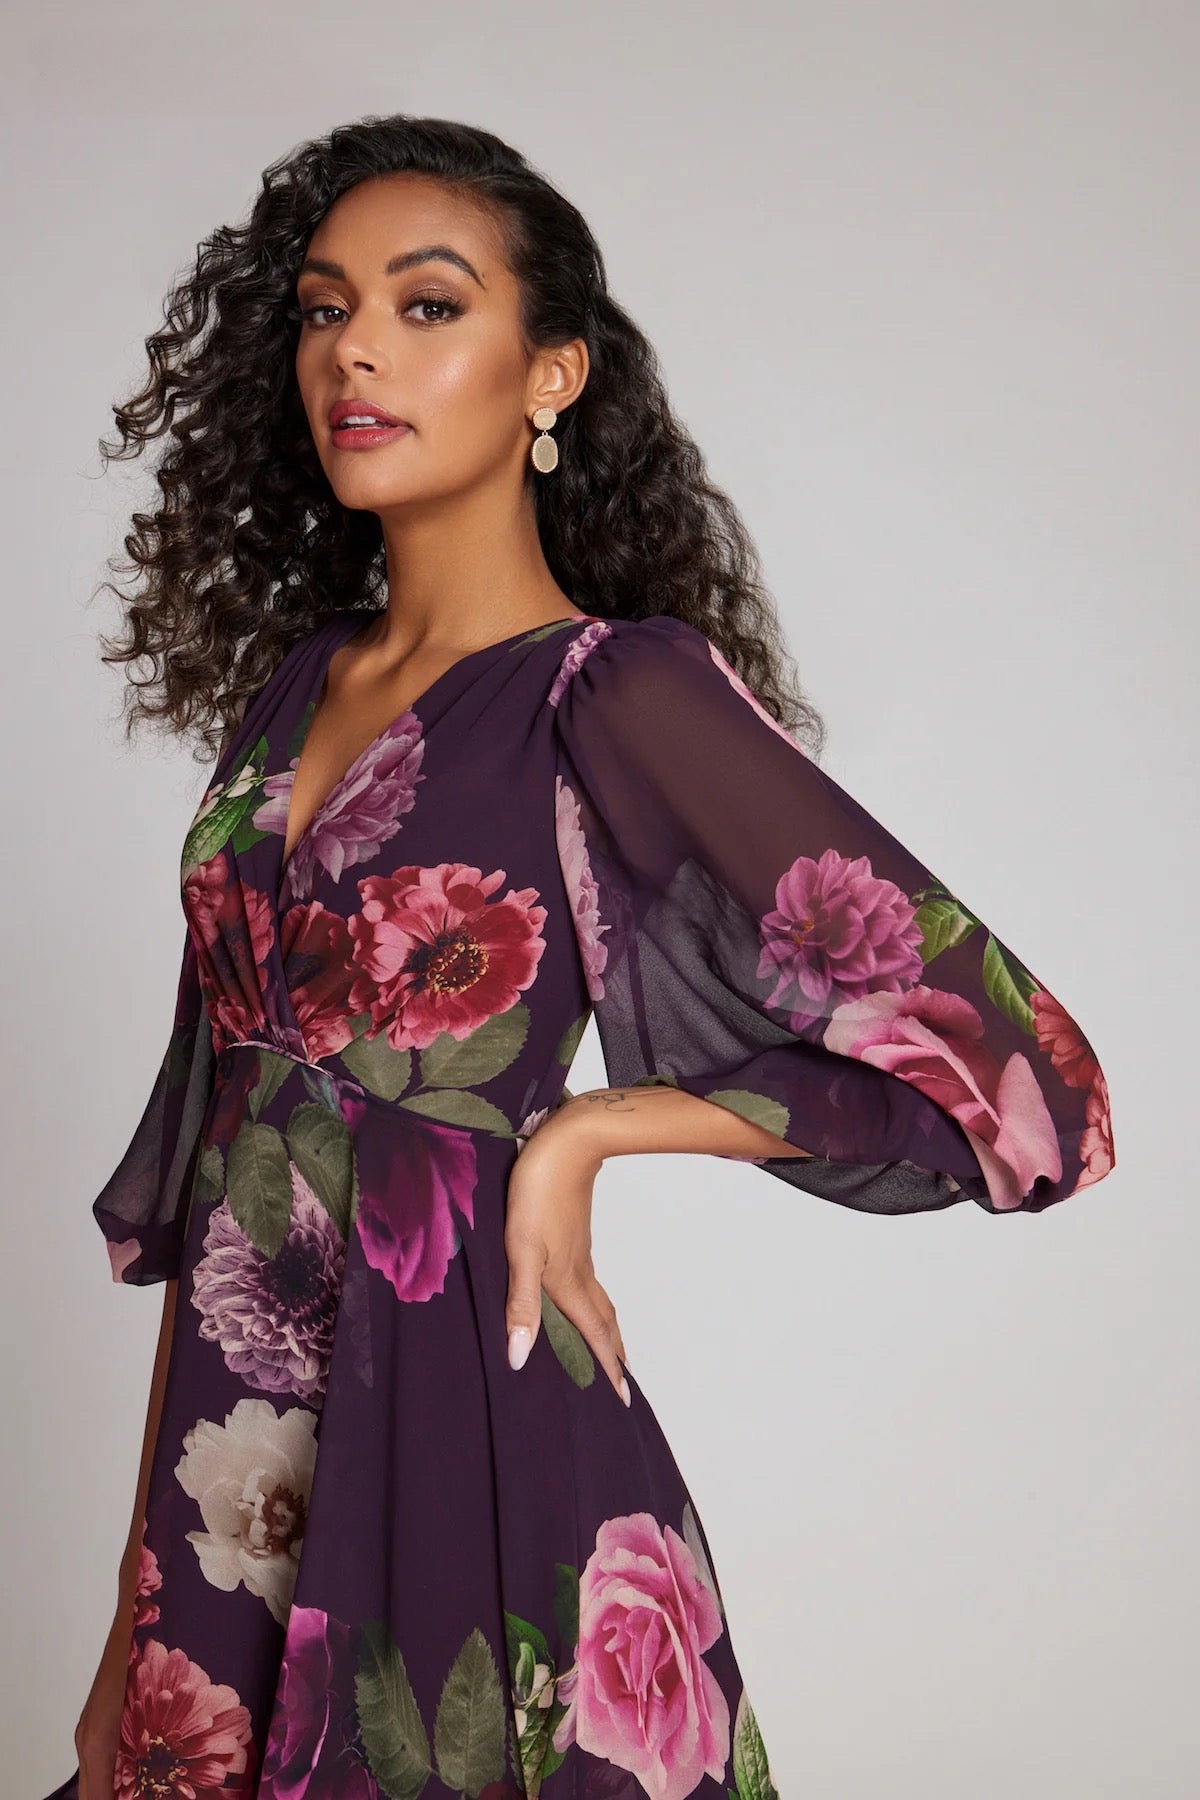 Teri Jon Style 23345 Plum Floral Dress - Knee-length, V-neckline, 3/4 flounce sheer puff sleeves, perfect for day occasions, special events, engagement parties, or bridal showers.